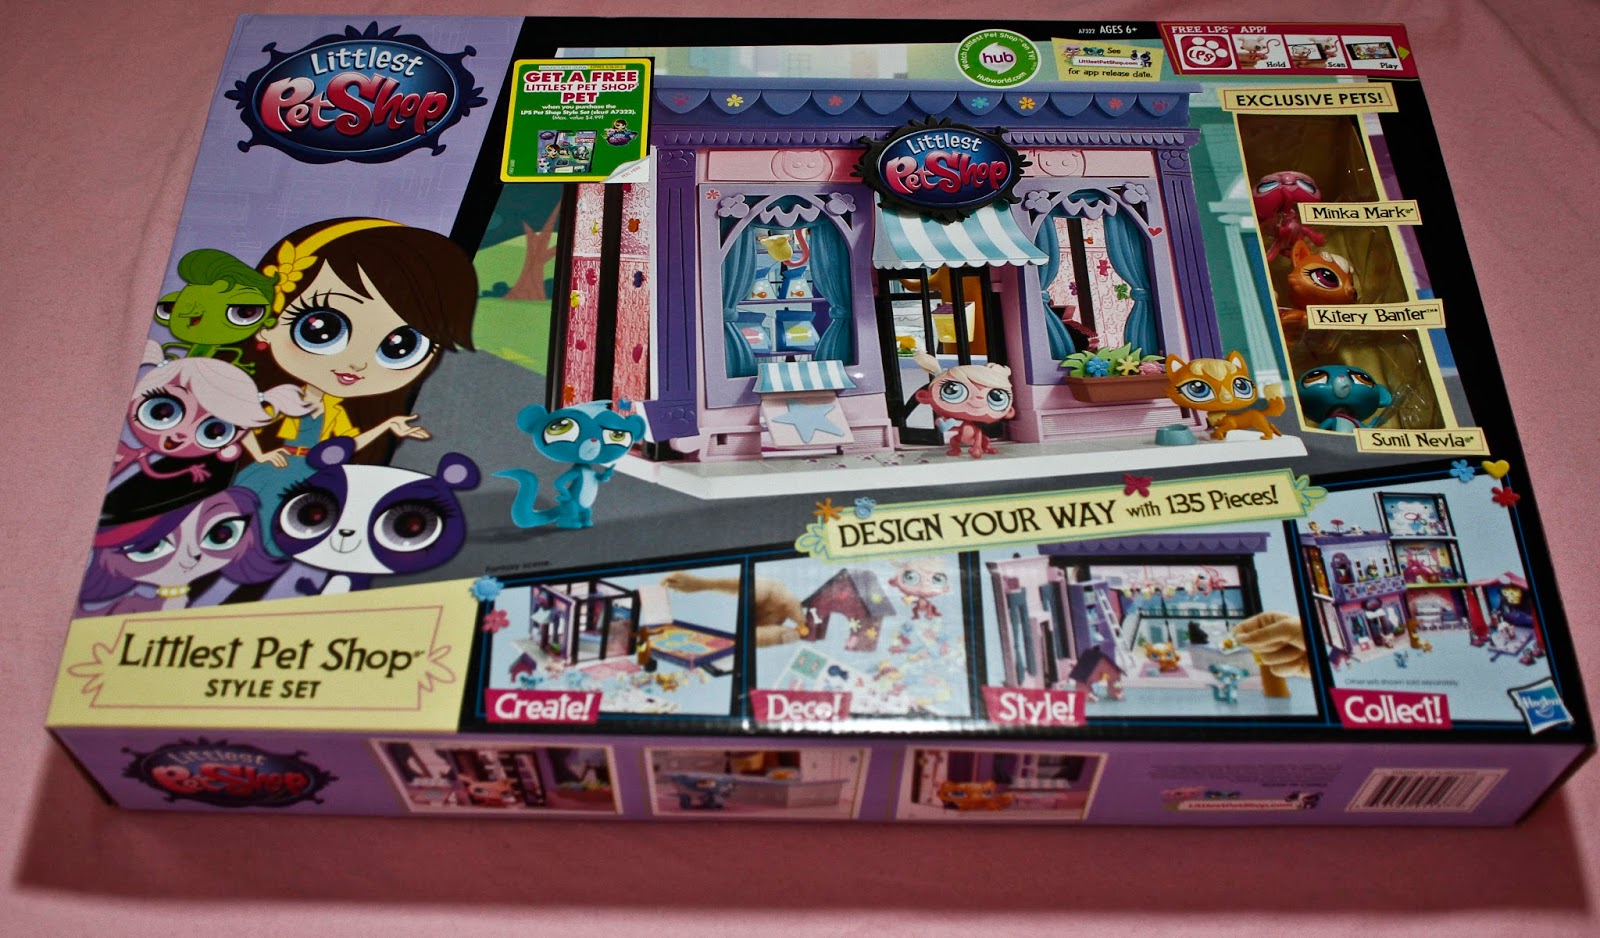 showing a photogrpah of the littlest pet shop style set before opening the box